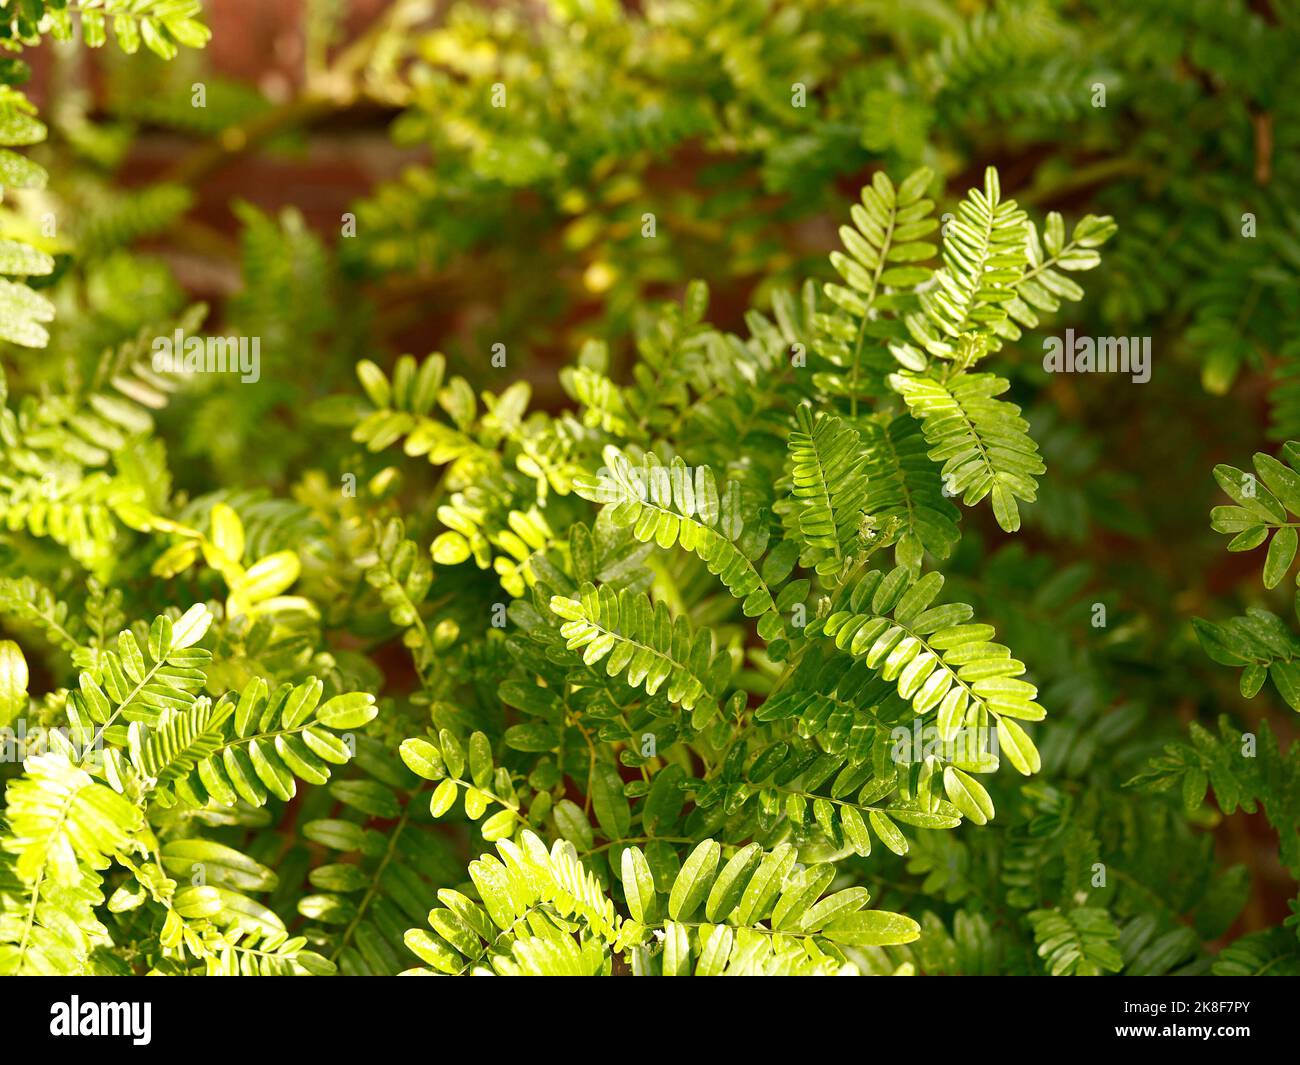 Close up of the evergreen leaves of the perennial garden climbing plant Clianthus maximus Kaka King. Stock Photo